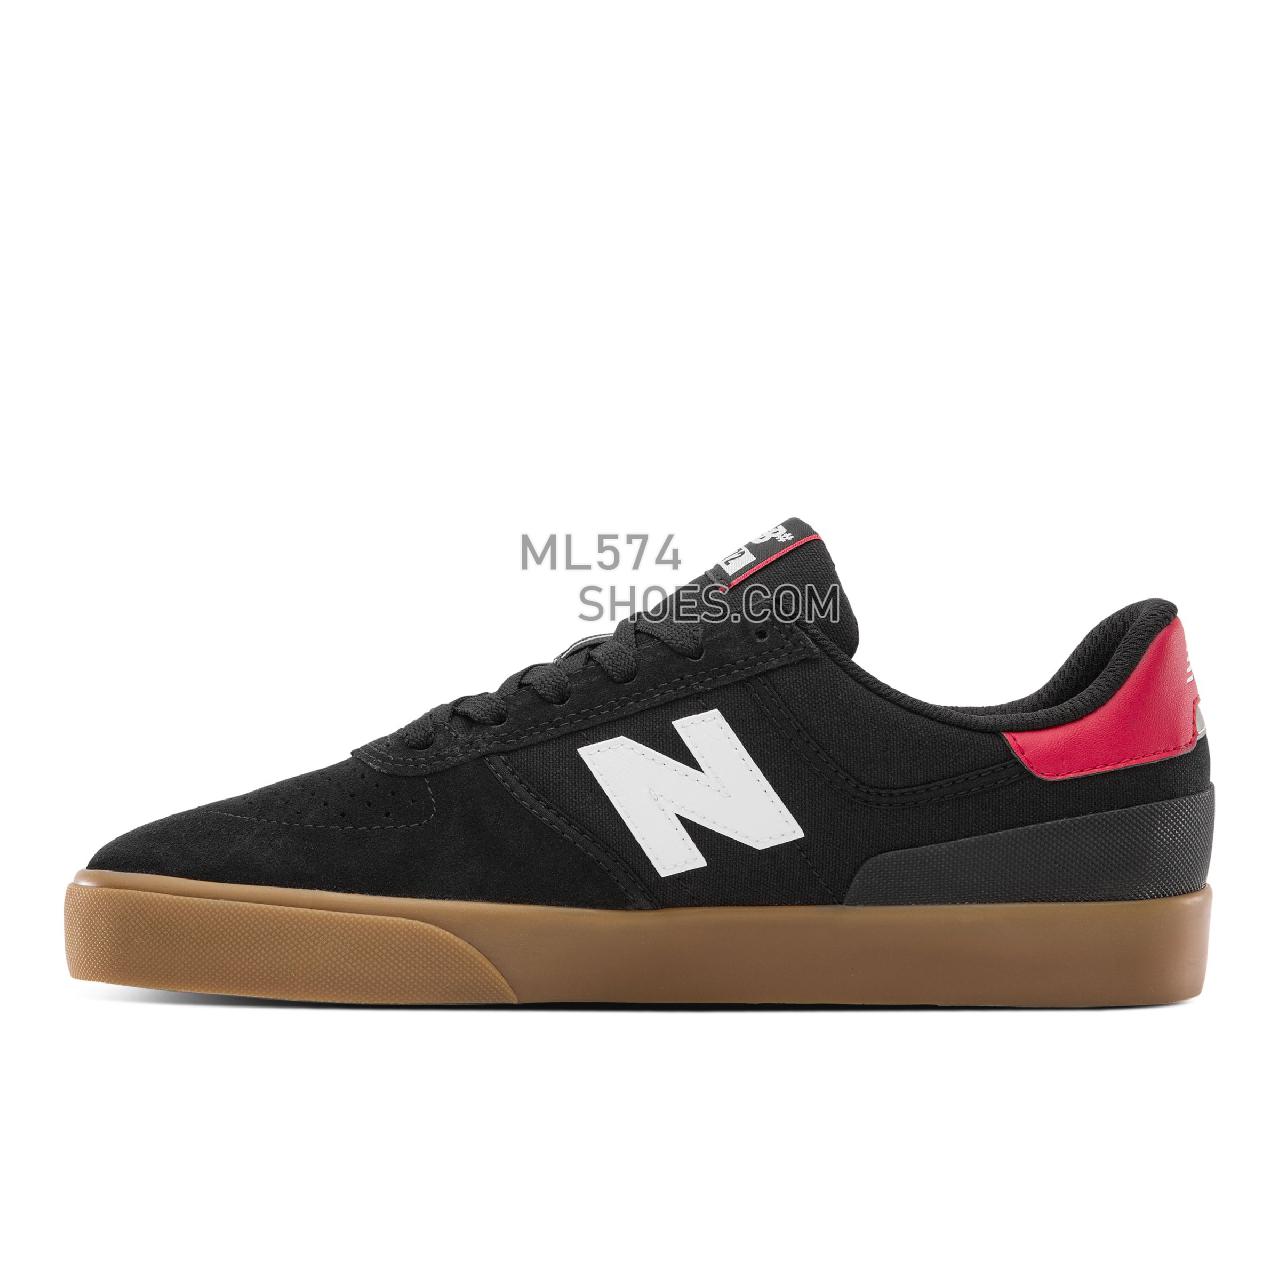 New Balance NB NUMERIC 272 - Men's NB Numeric Skate - Black with White and Red - NM272ADS